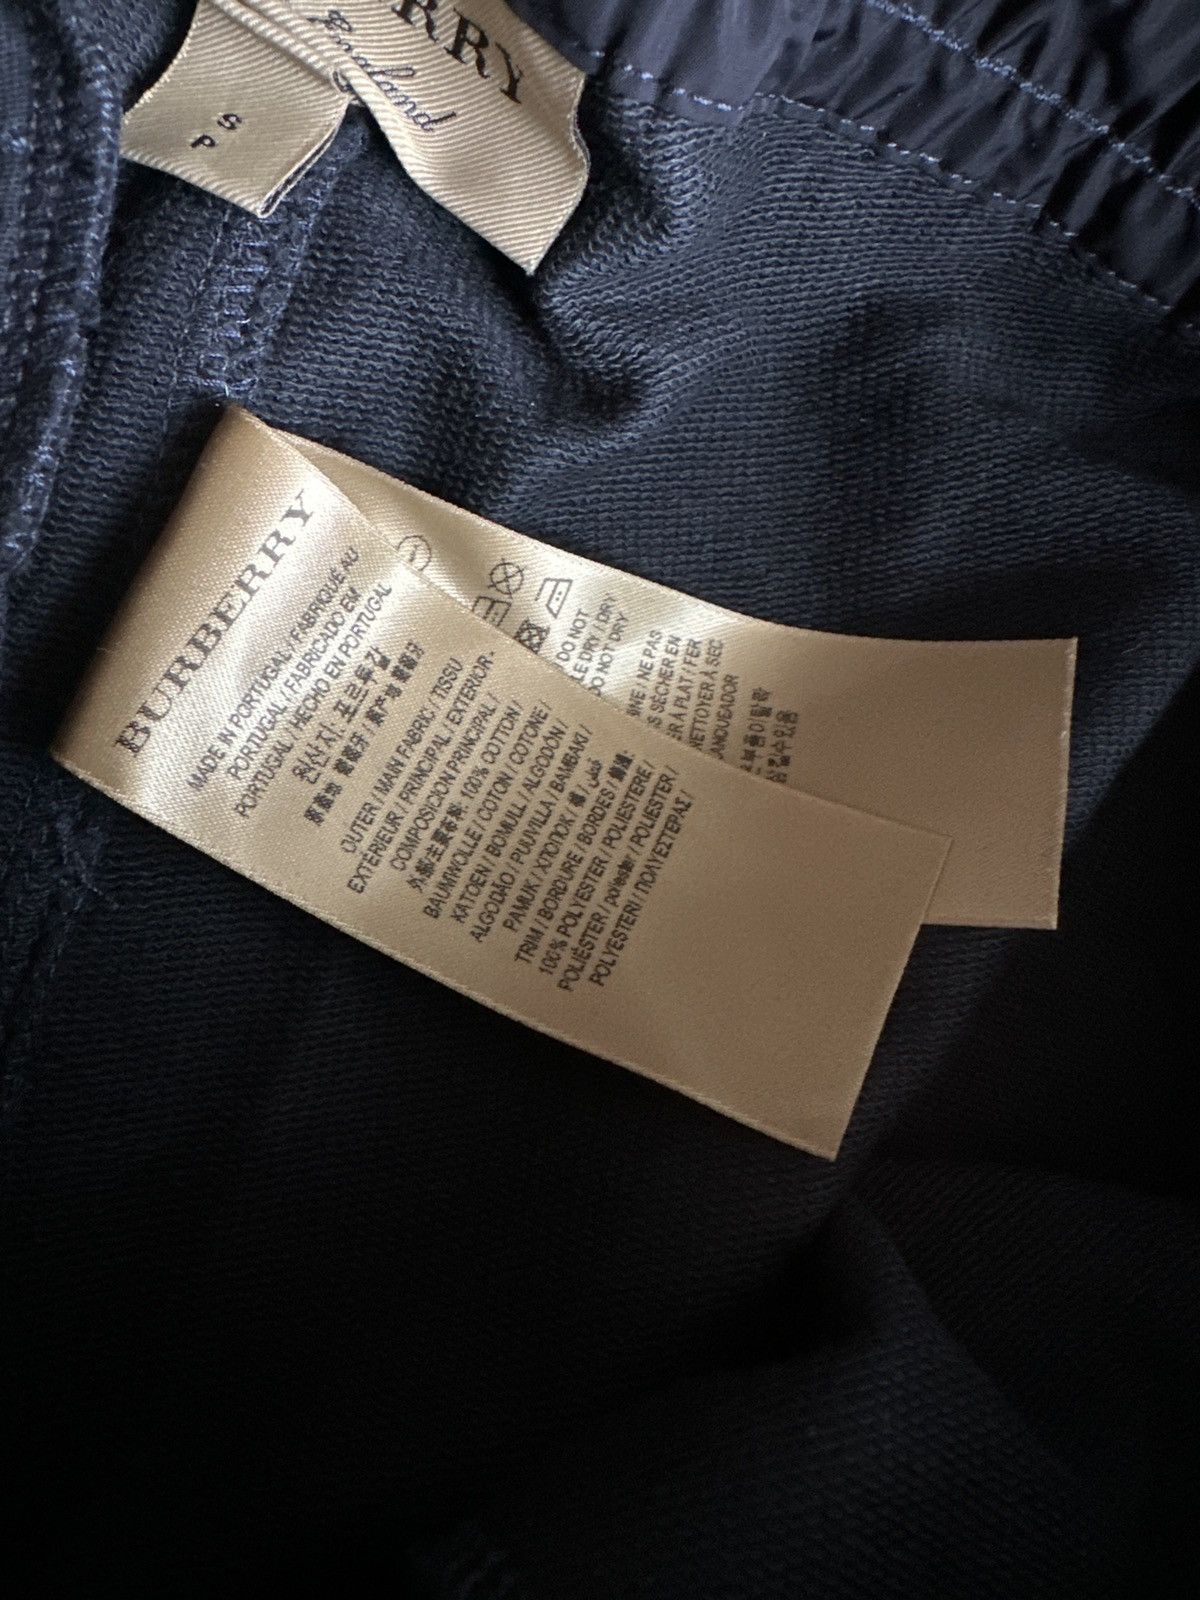 Burberry BURBERRY TAPERED SWEATPANTS Size US 28 / EU 44 - 6 Preview